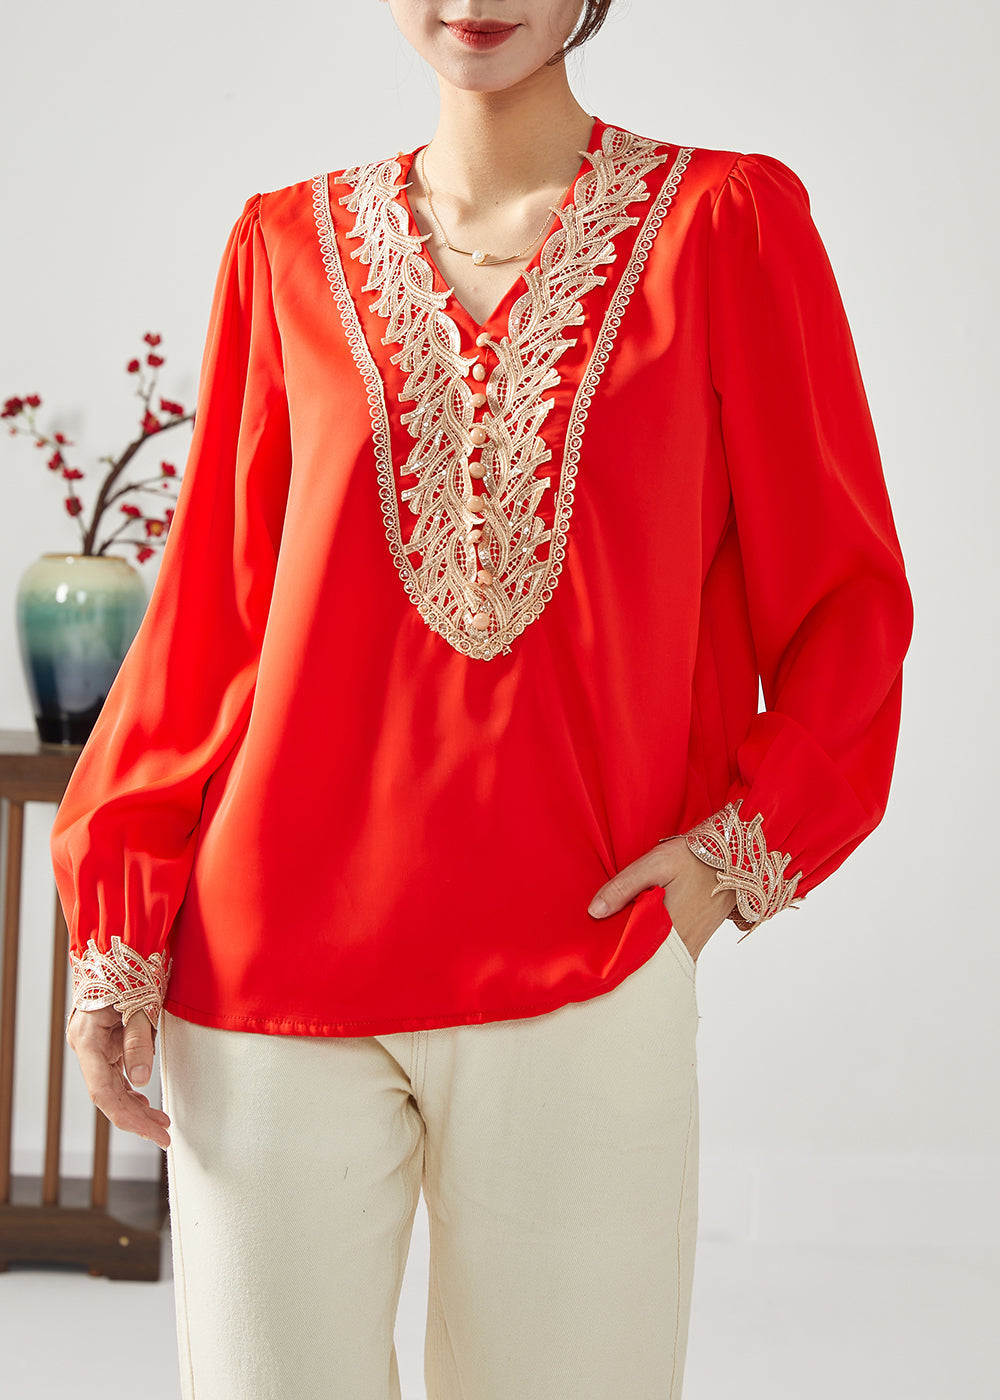 Classy Red V Neck Patchwork Draping Chiffon Tops Spring LY1114 - fabuloryshop